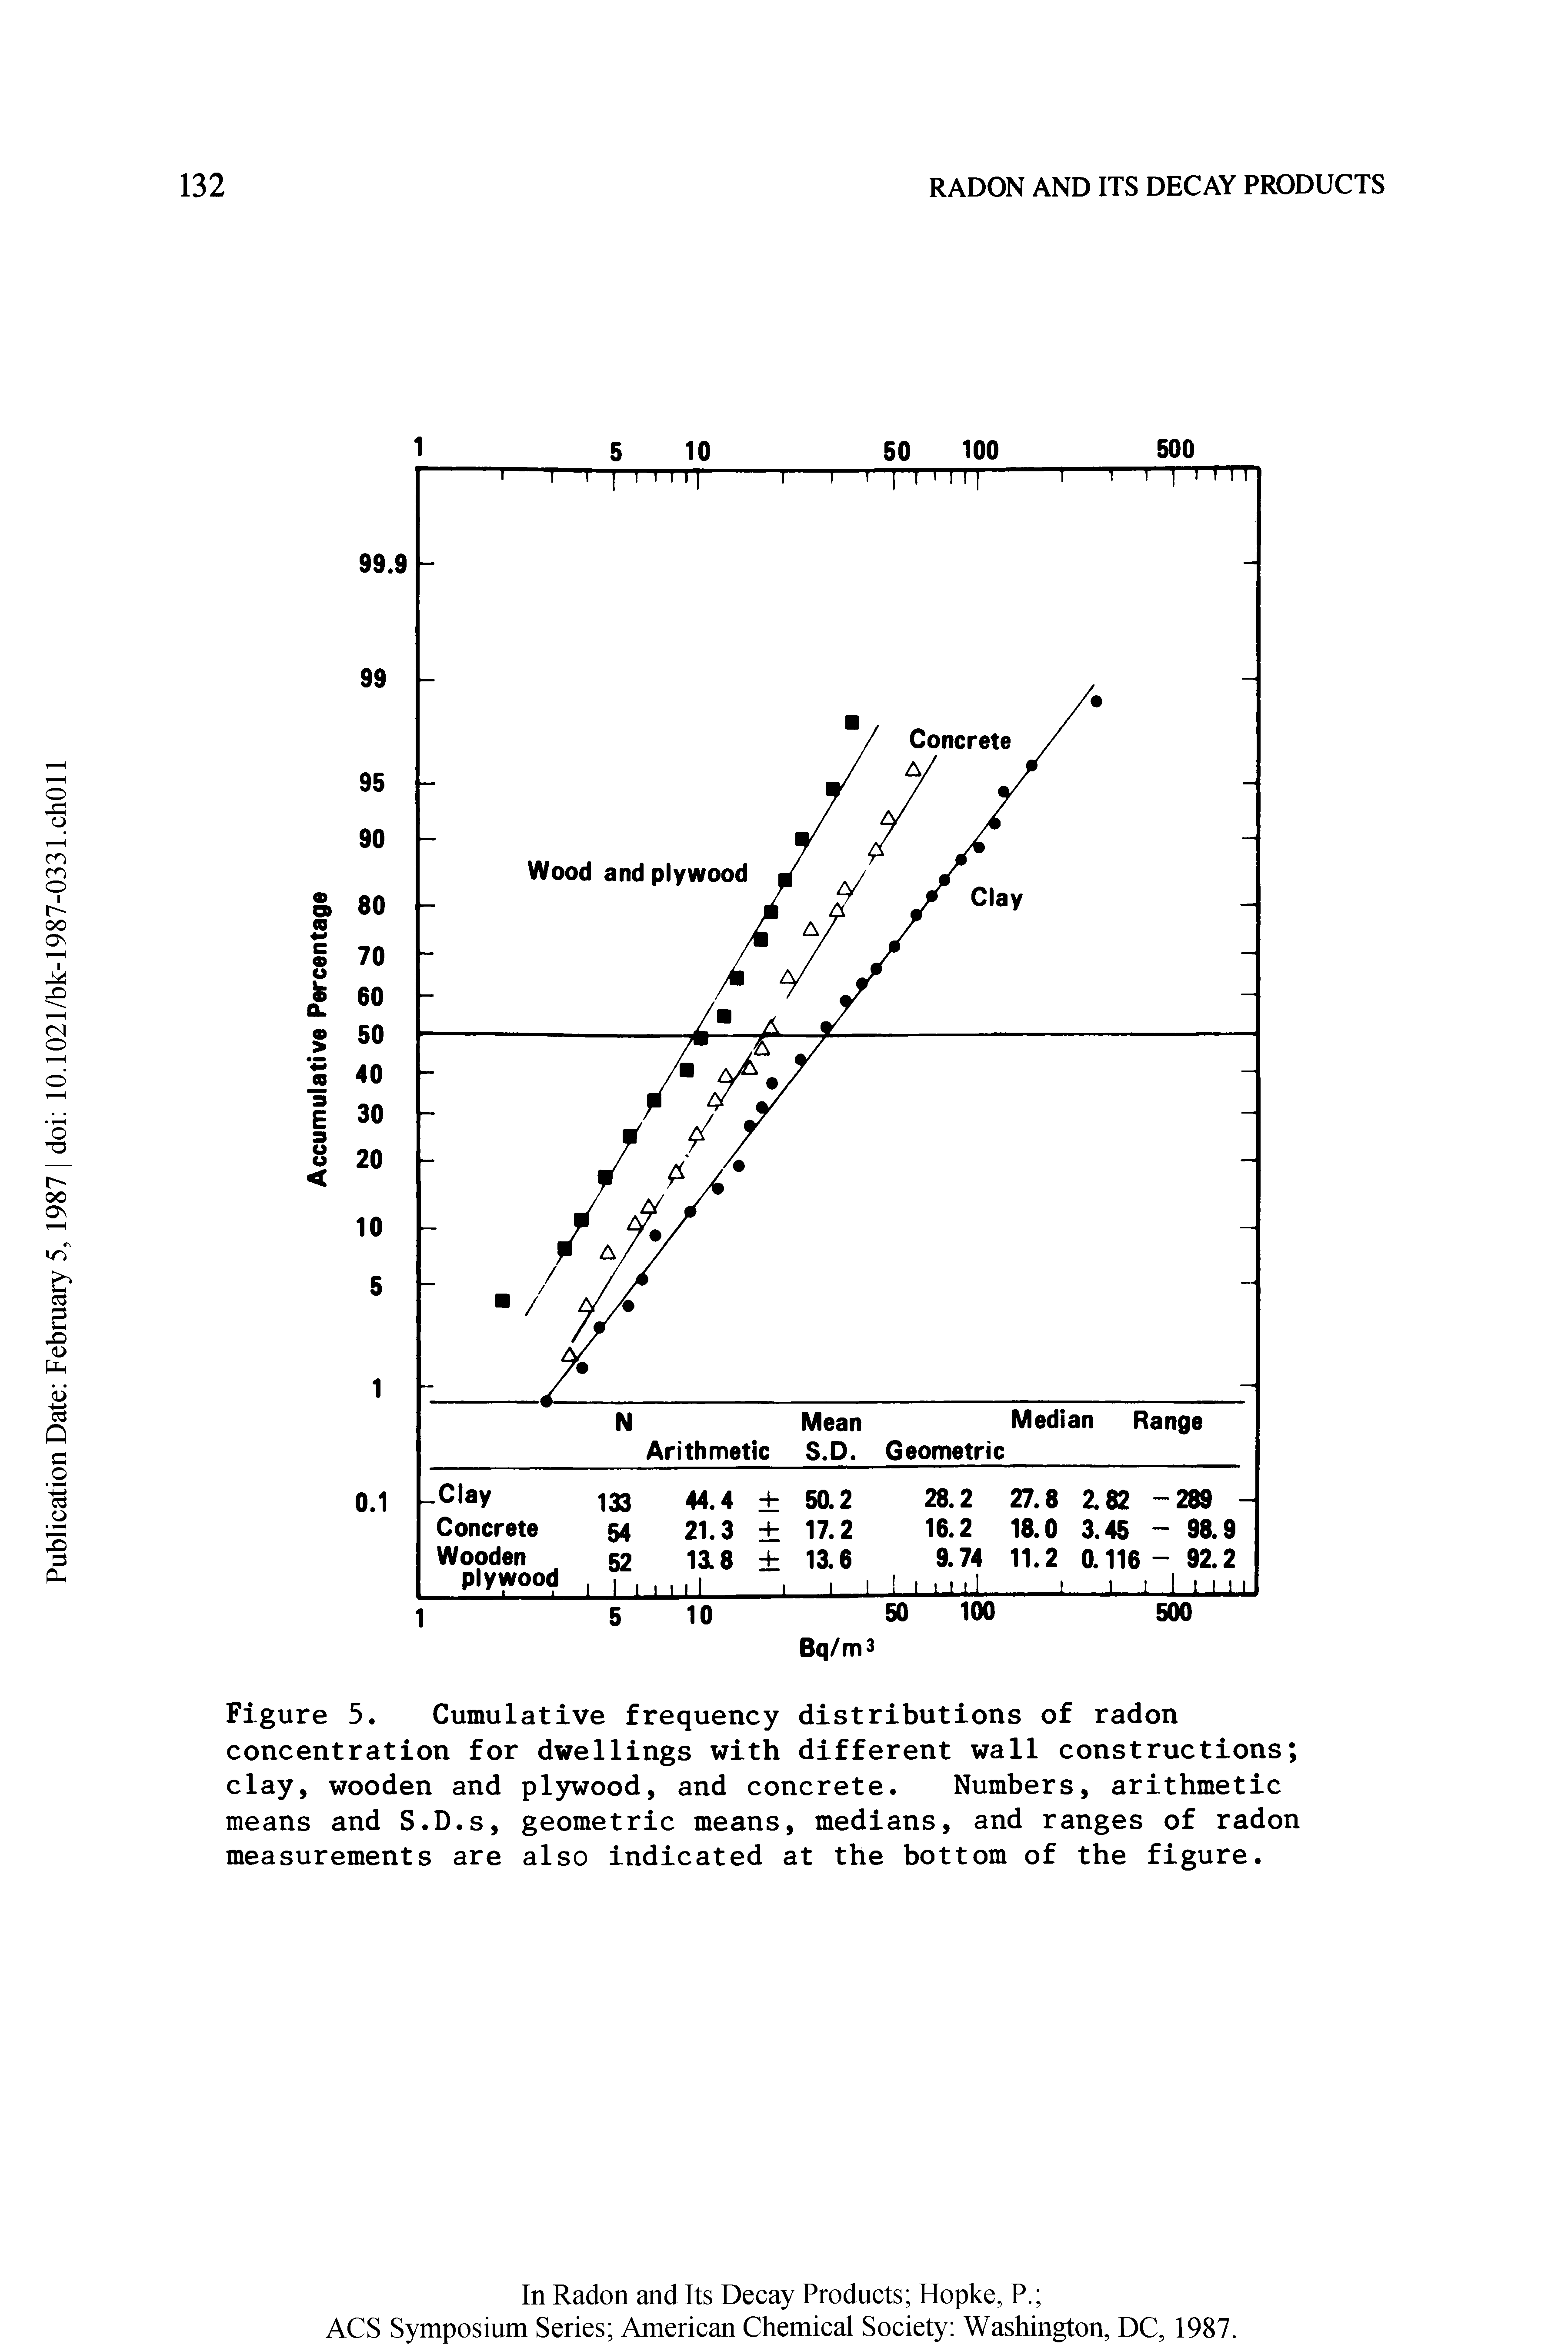 Figure 5. Cumulative frequency distributions of radon concentration for dwellings with different wall constructions clay, wooden and plywood, and concrete. Numbers, arithmetic means and S.D.s, geometric means, medians, and ranges of radon measurements are also indicated at the bottom of the figure.